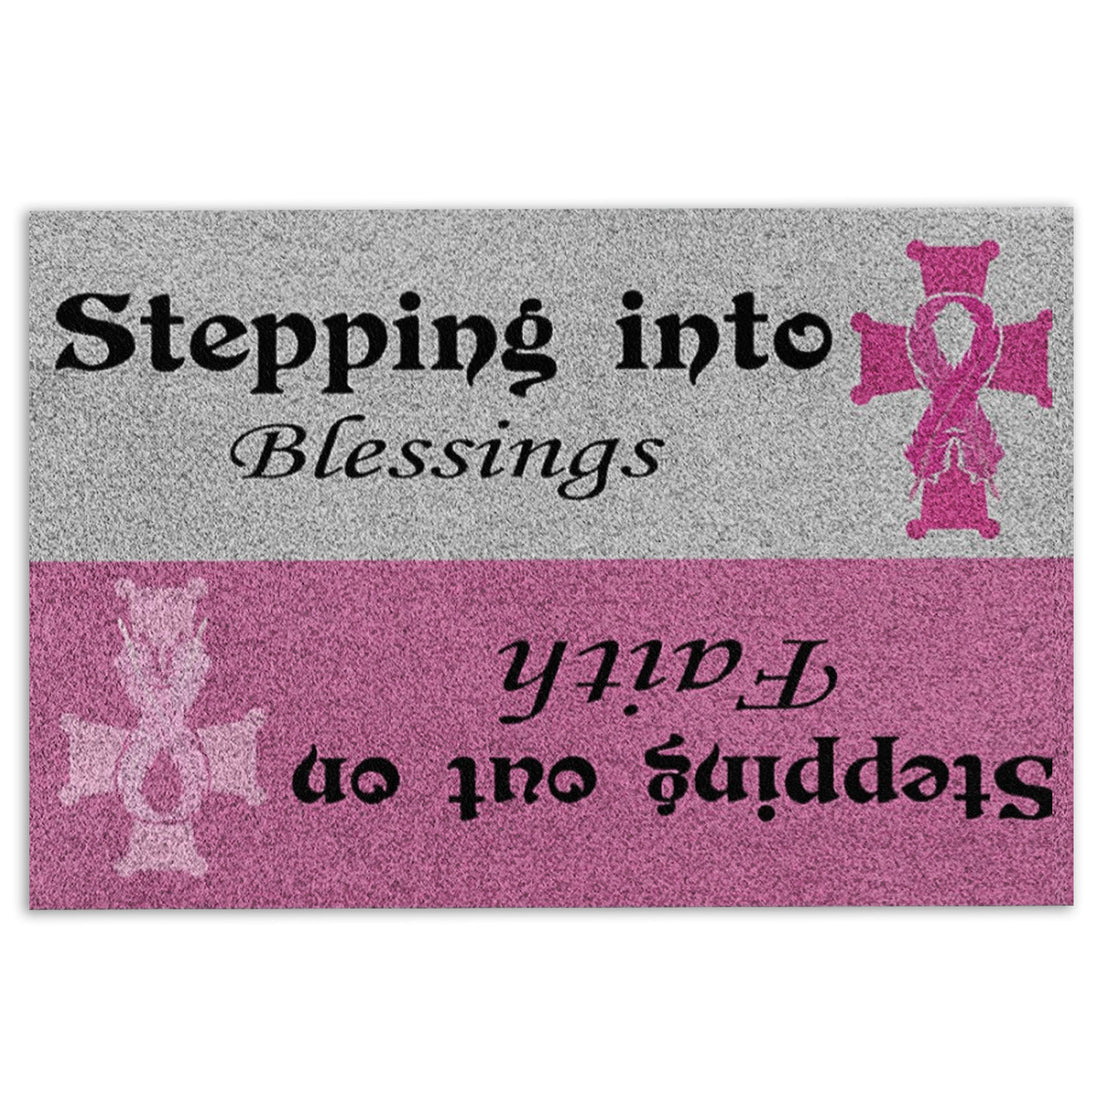 Ohaprints-Doormat-Outdoor-Indoor-Breast-Cancer-Stepping-Into-Blessings-Blessing-Out-On-Faith-Rubber-Door-Mat-721-18'' x 30''